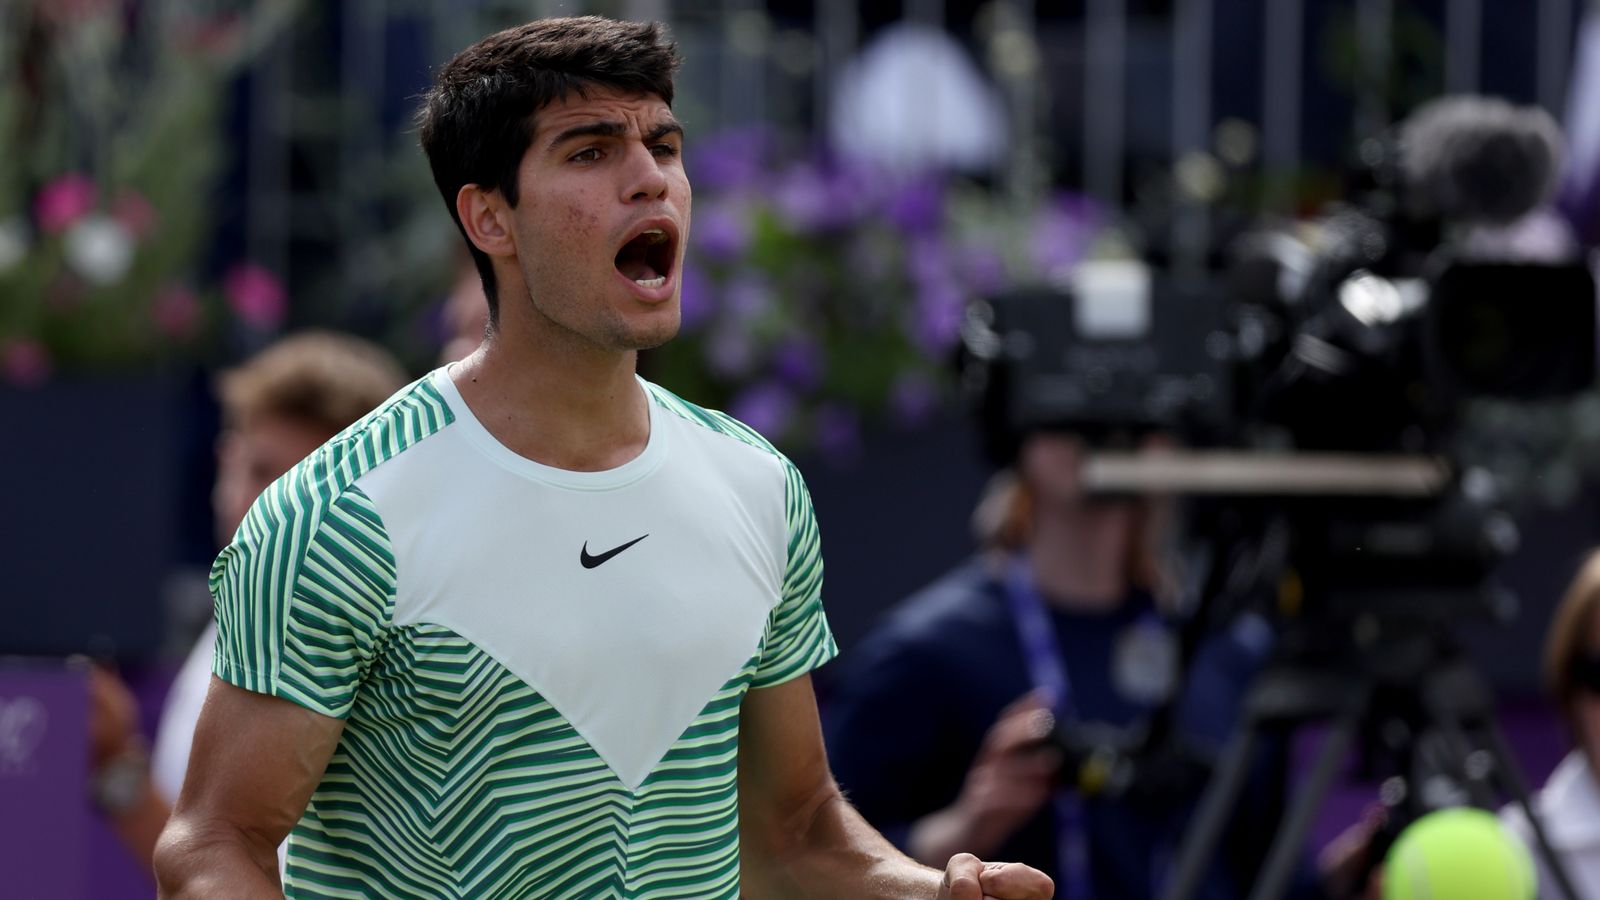 Carlos Alcaraz: Spaniard wins title at Queen's Club which will see him overtake Novak Djokovic as world No 1 | Tennis News